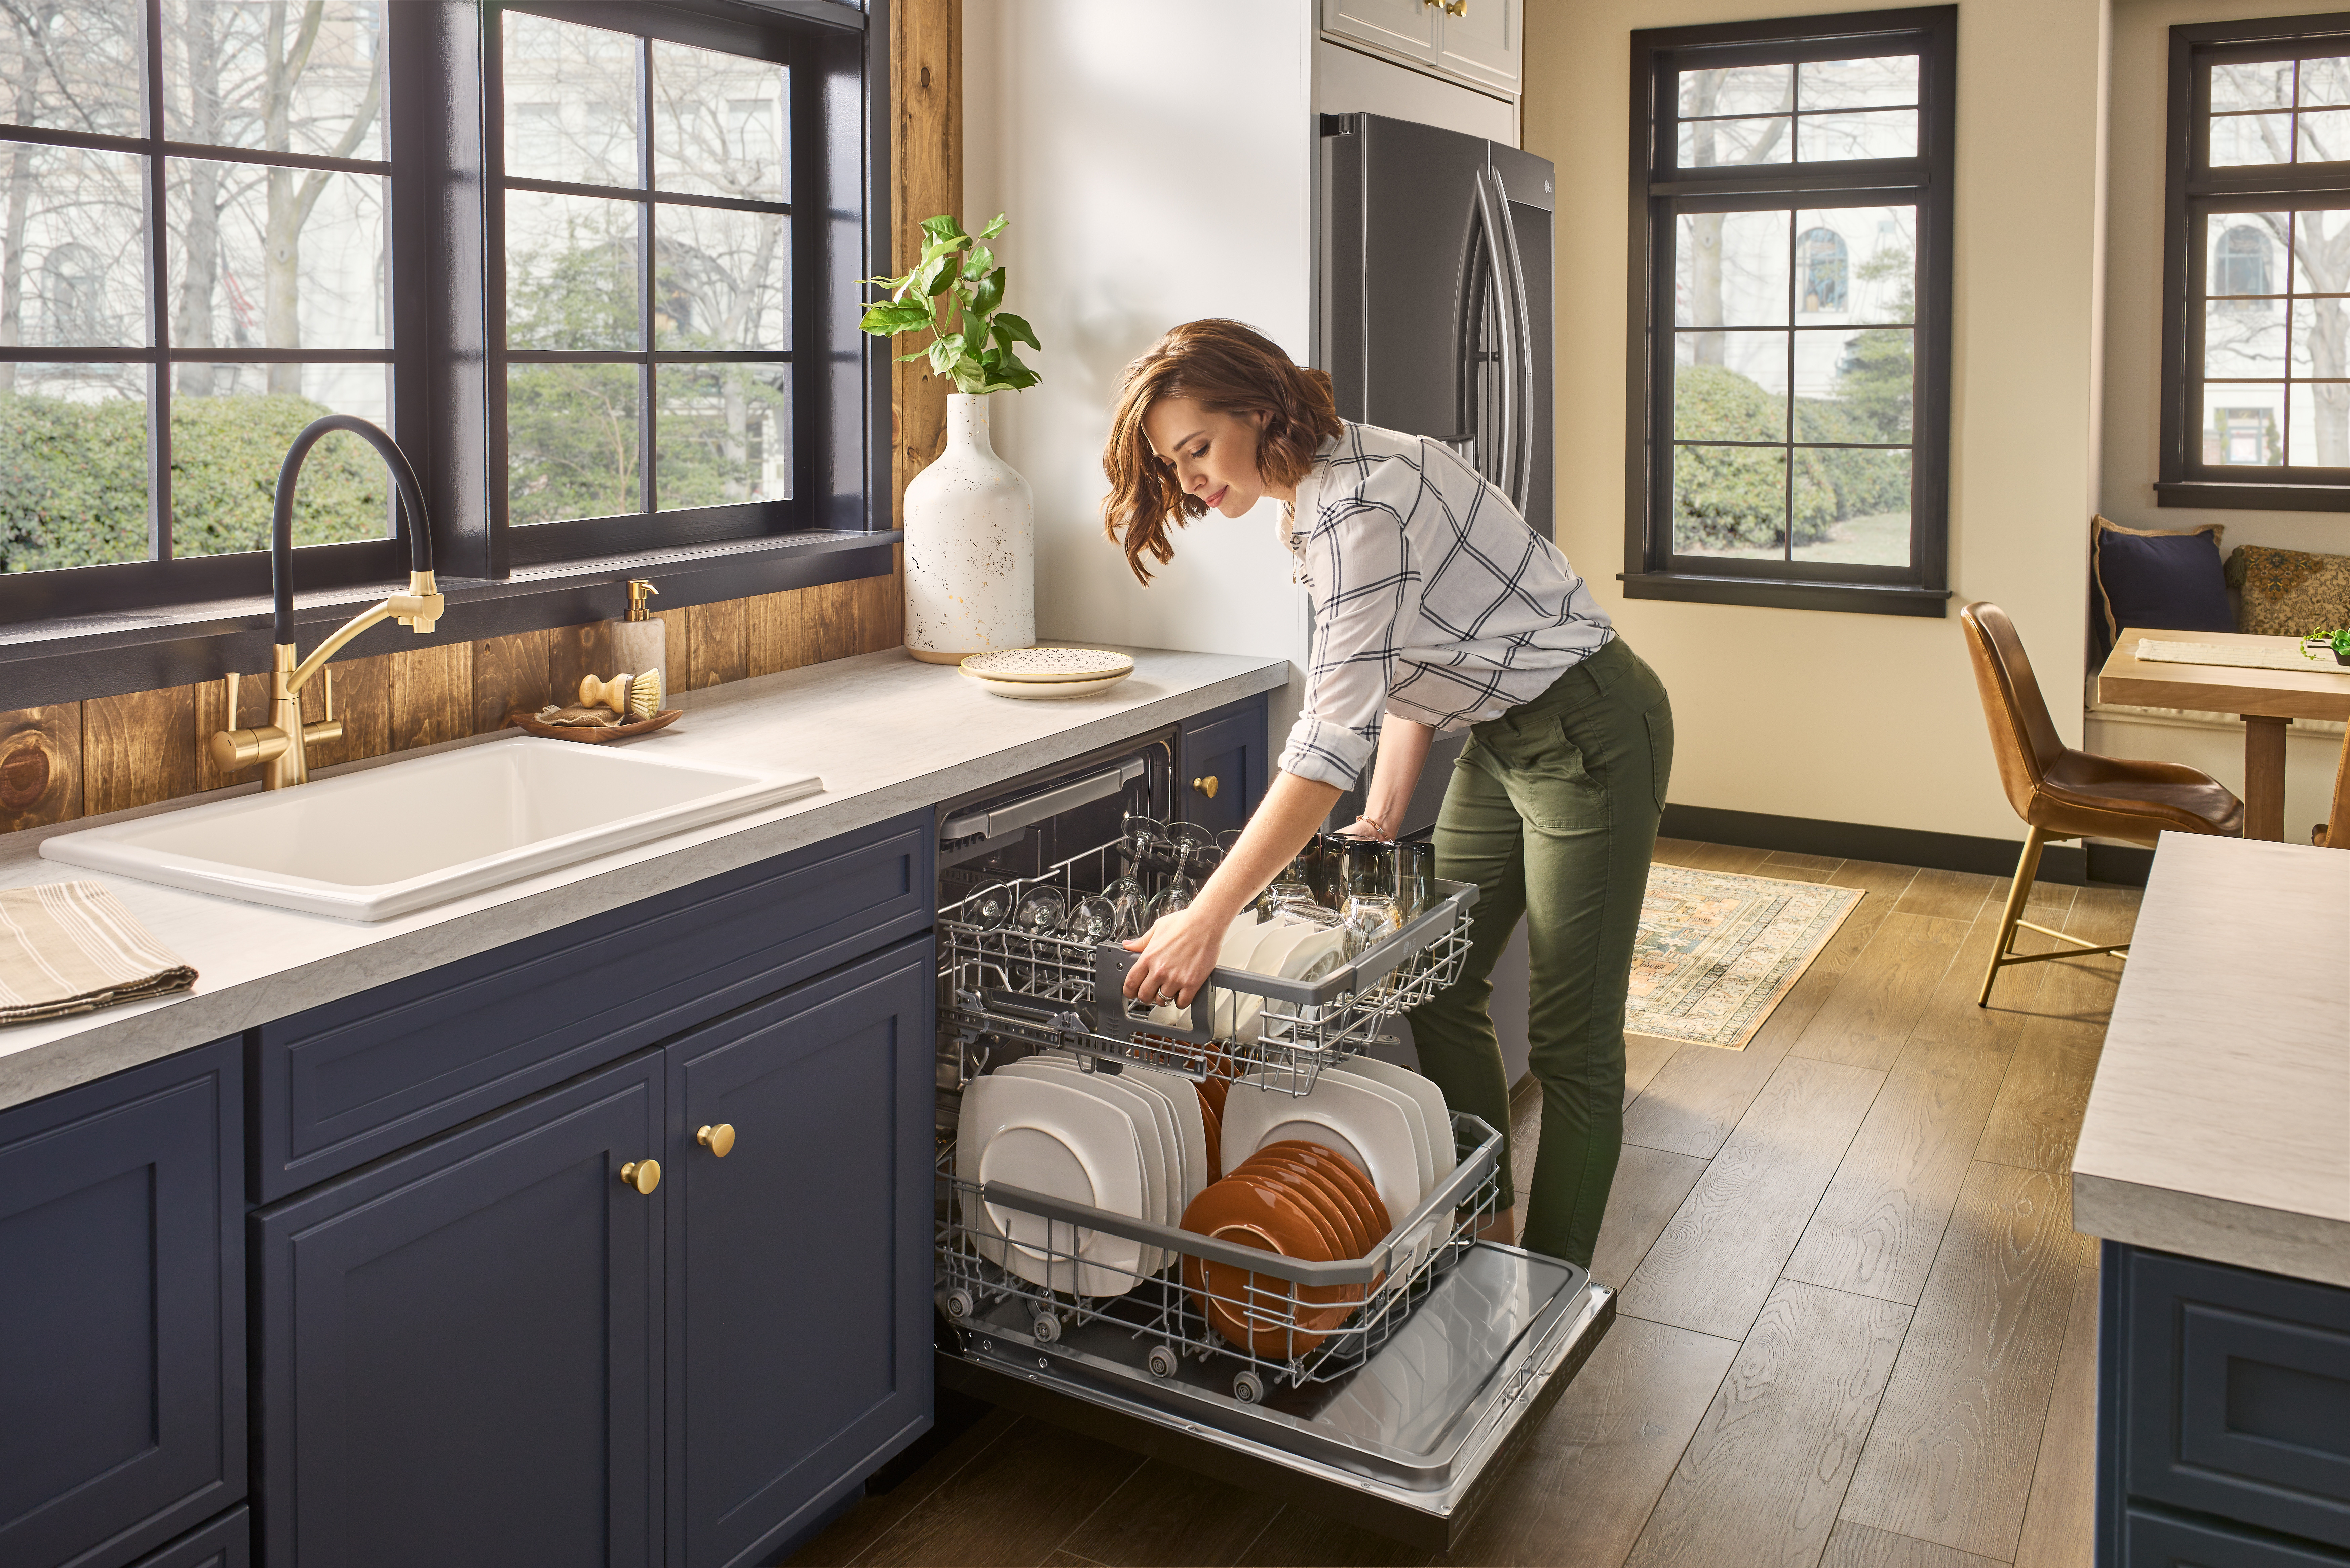 young woman unloads cleaned dishes from LG dishwasher